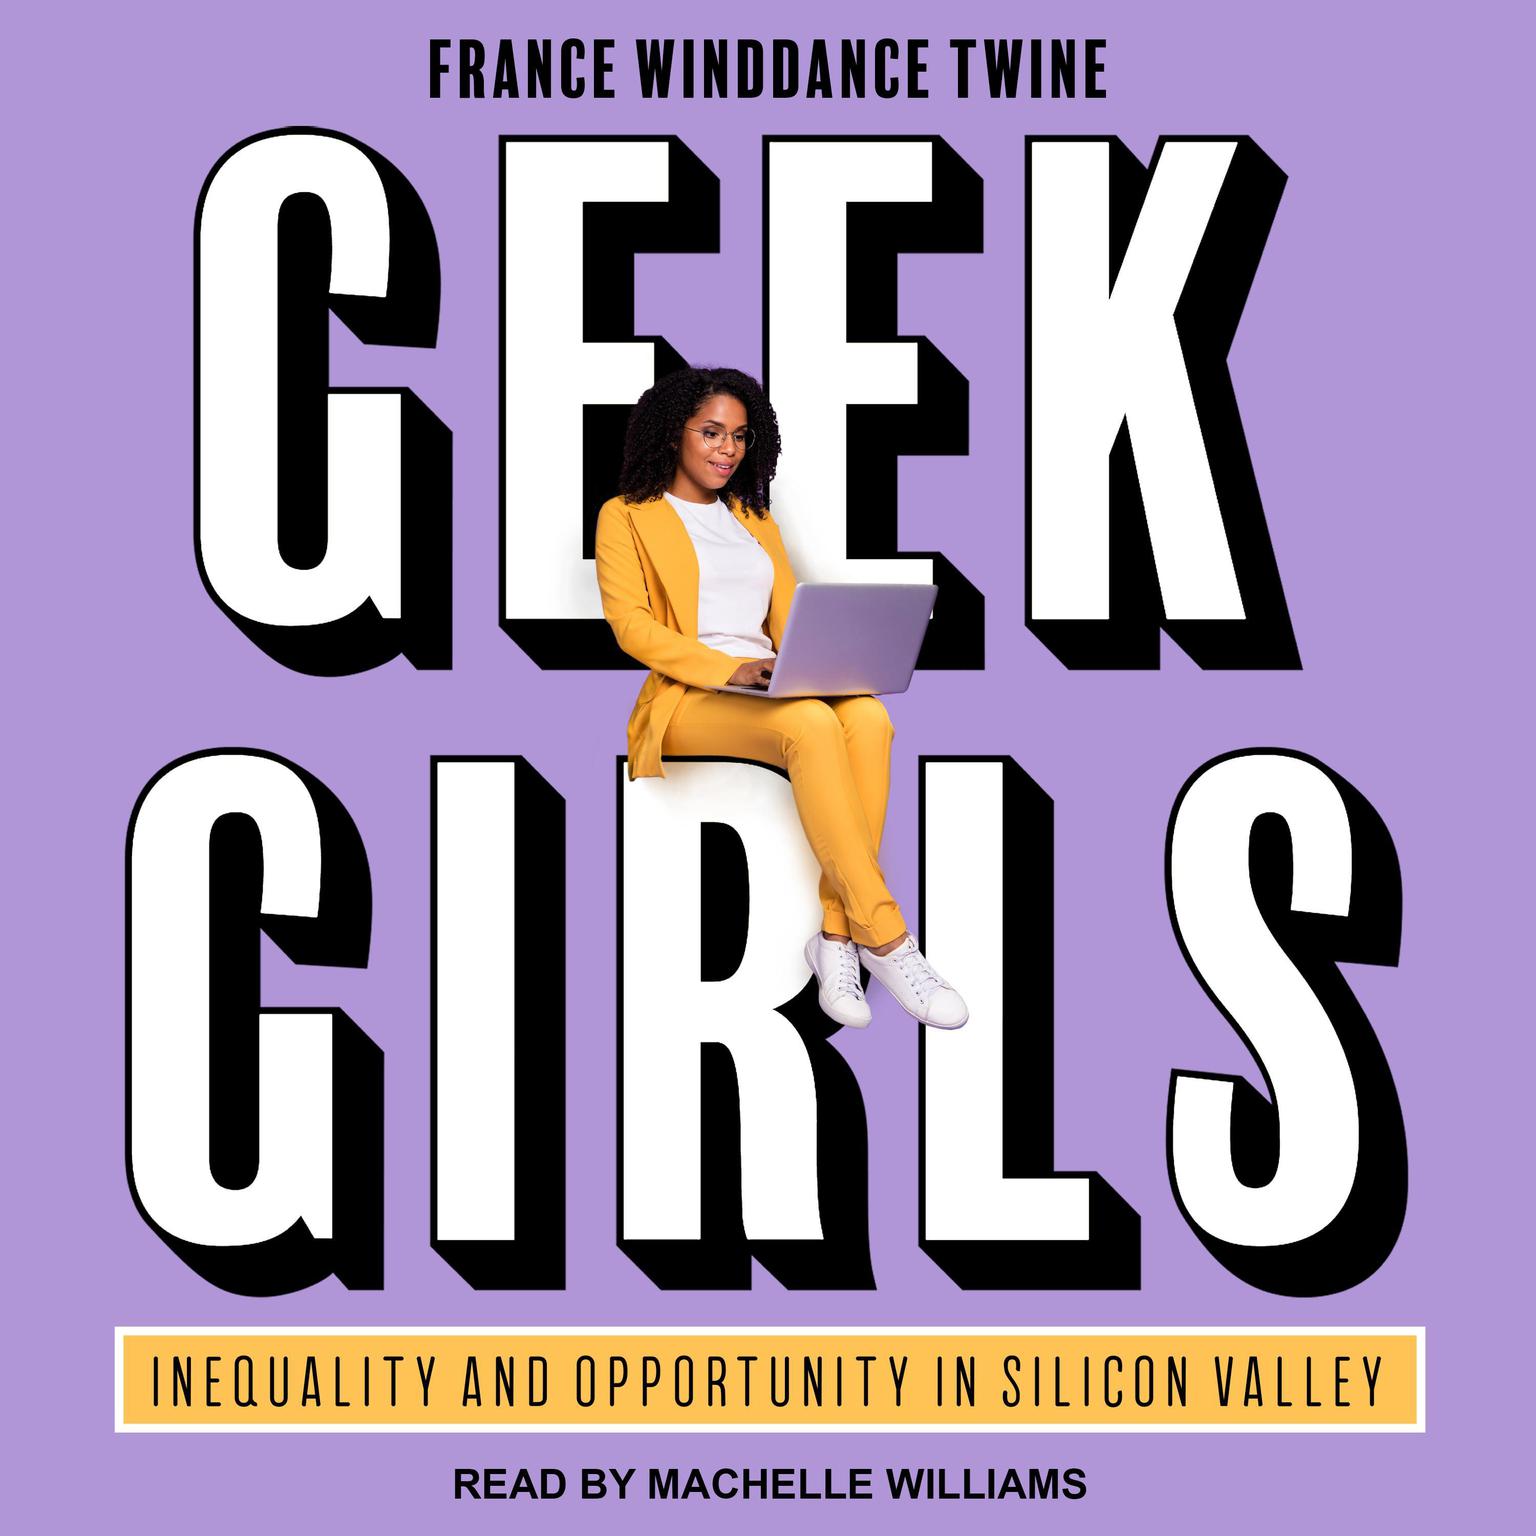 Geek Girls: Inequality and Opportunity in Silicon Valley Audiobook, by France Winddance Twine